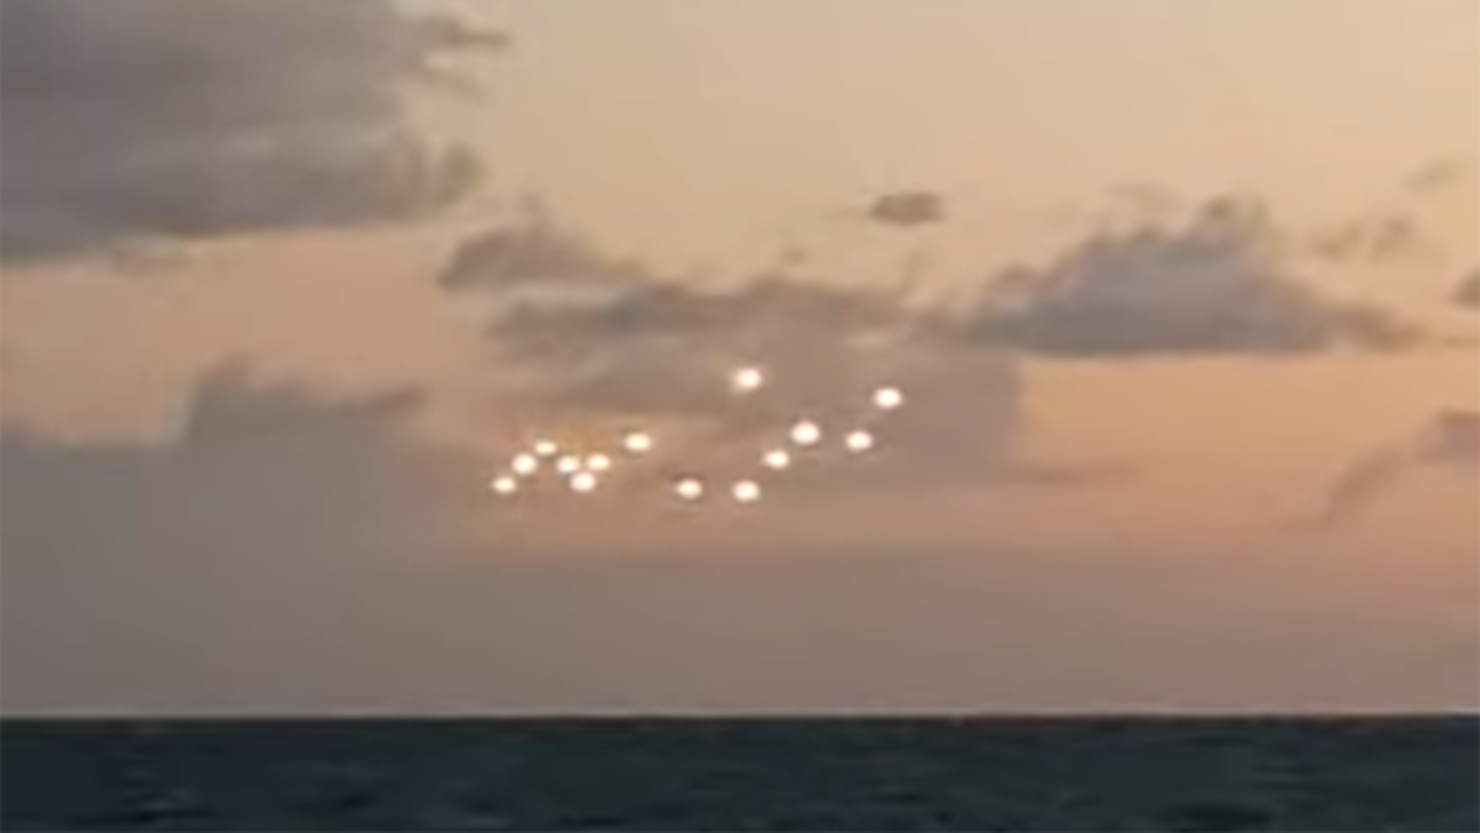 Video Shows Strange Glowing Objects In Sky Over North Carolina iHeart